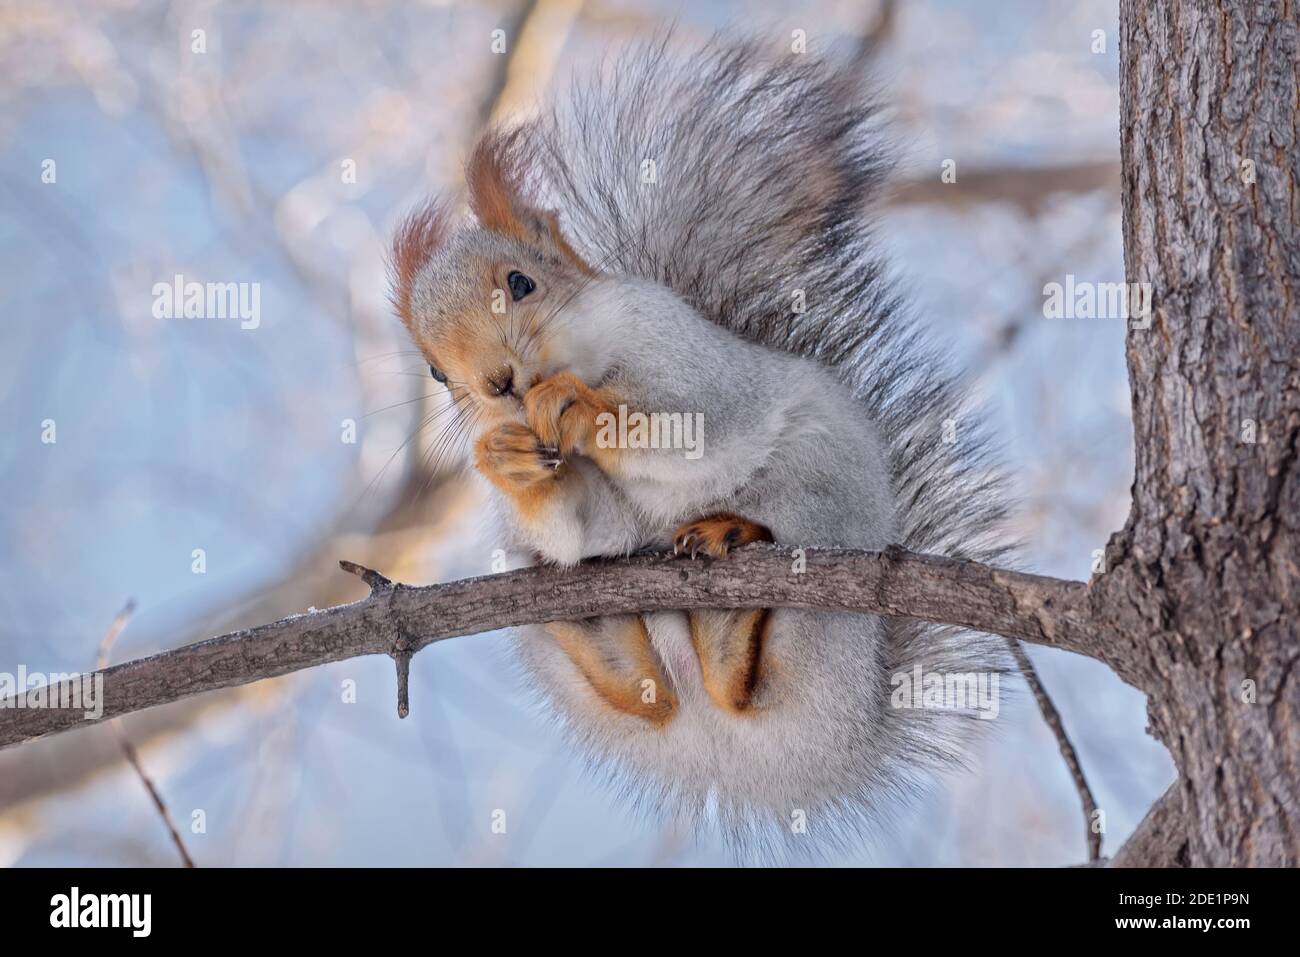 Little cute gray squirrel with a fluffy tail close-up on a tree branch in winter in the park Stock Photo